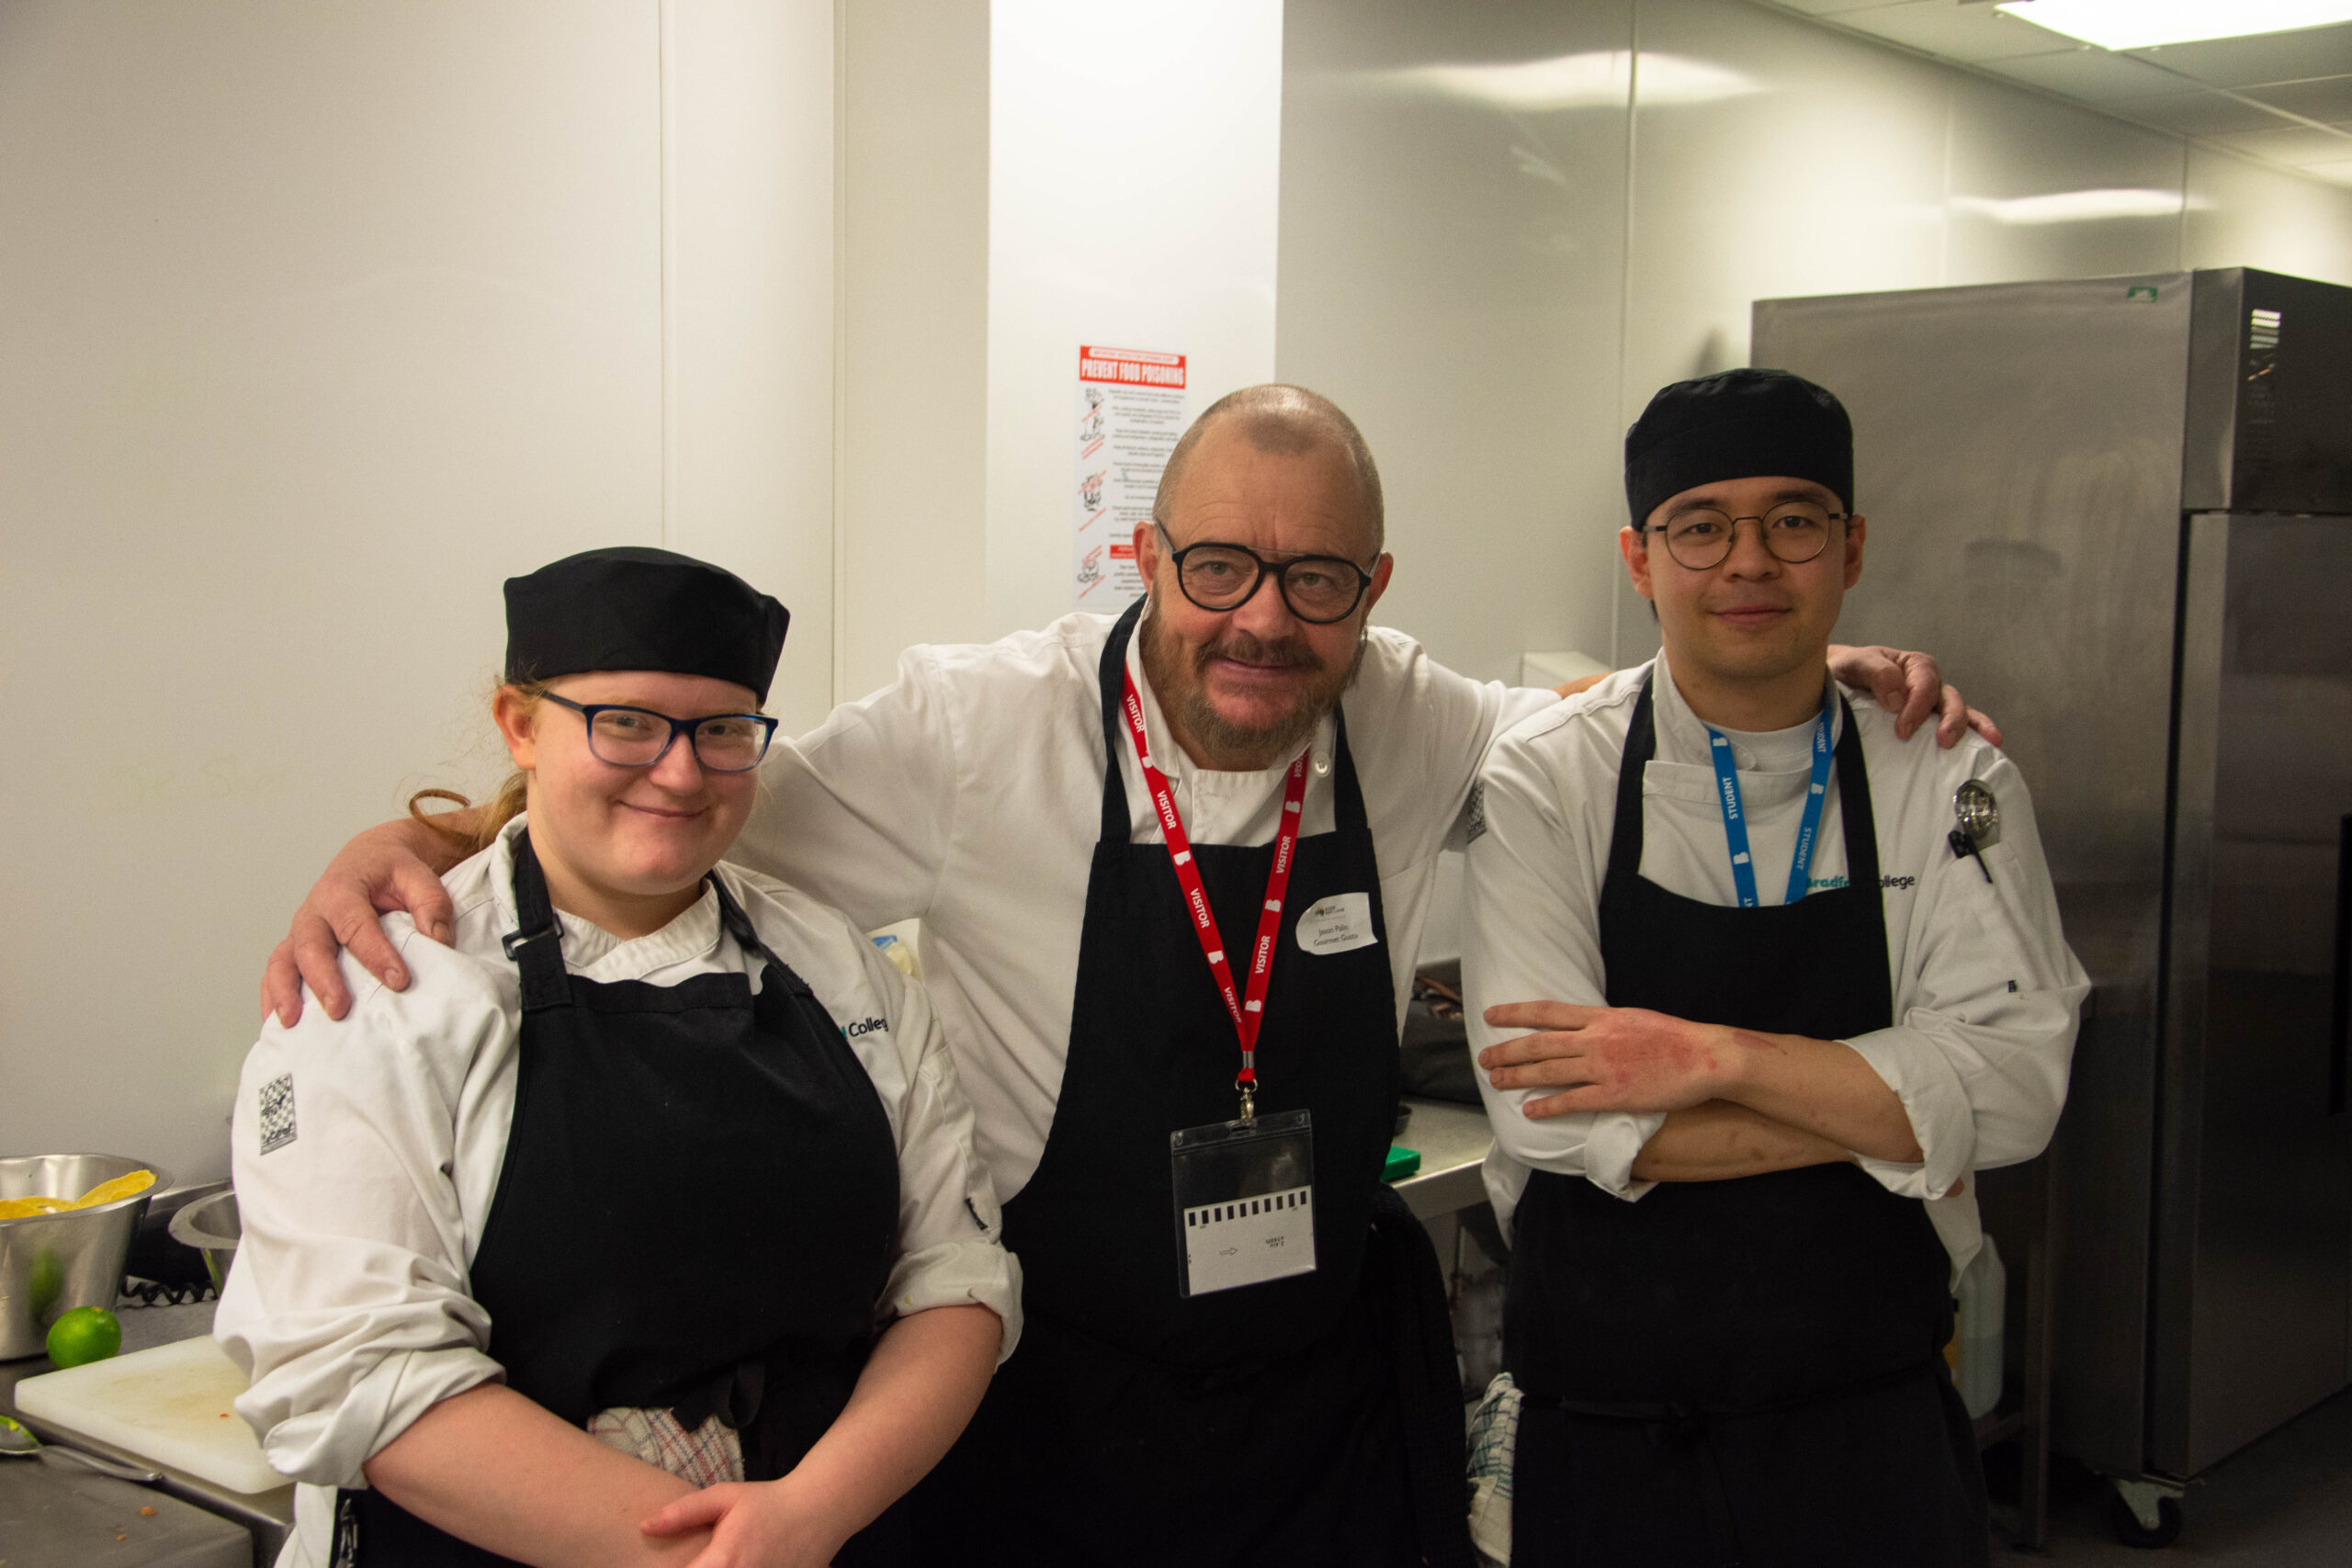 Bradford College welcomes TV chefs to campus for special focus group event